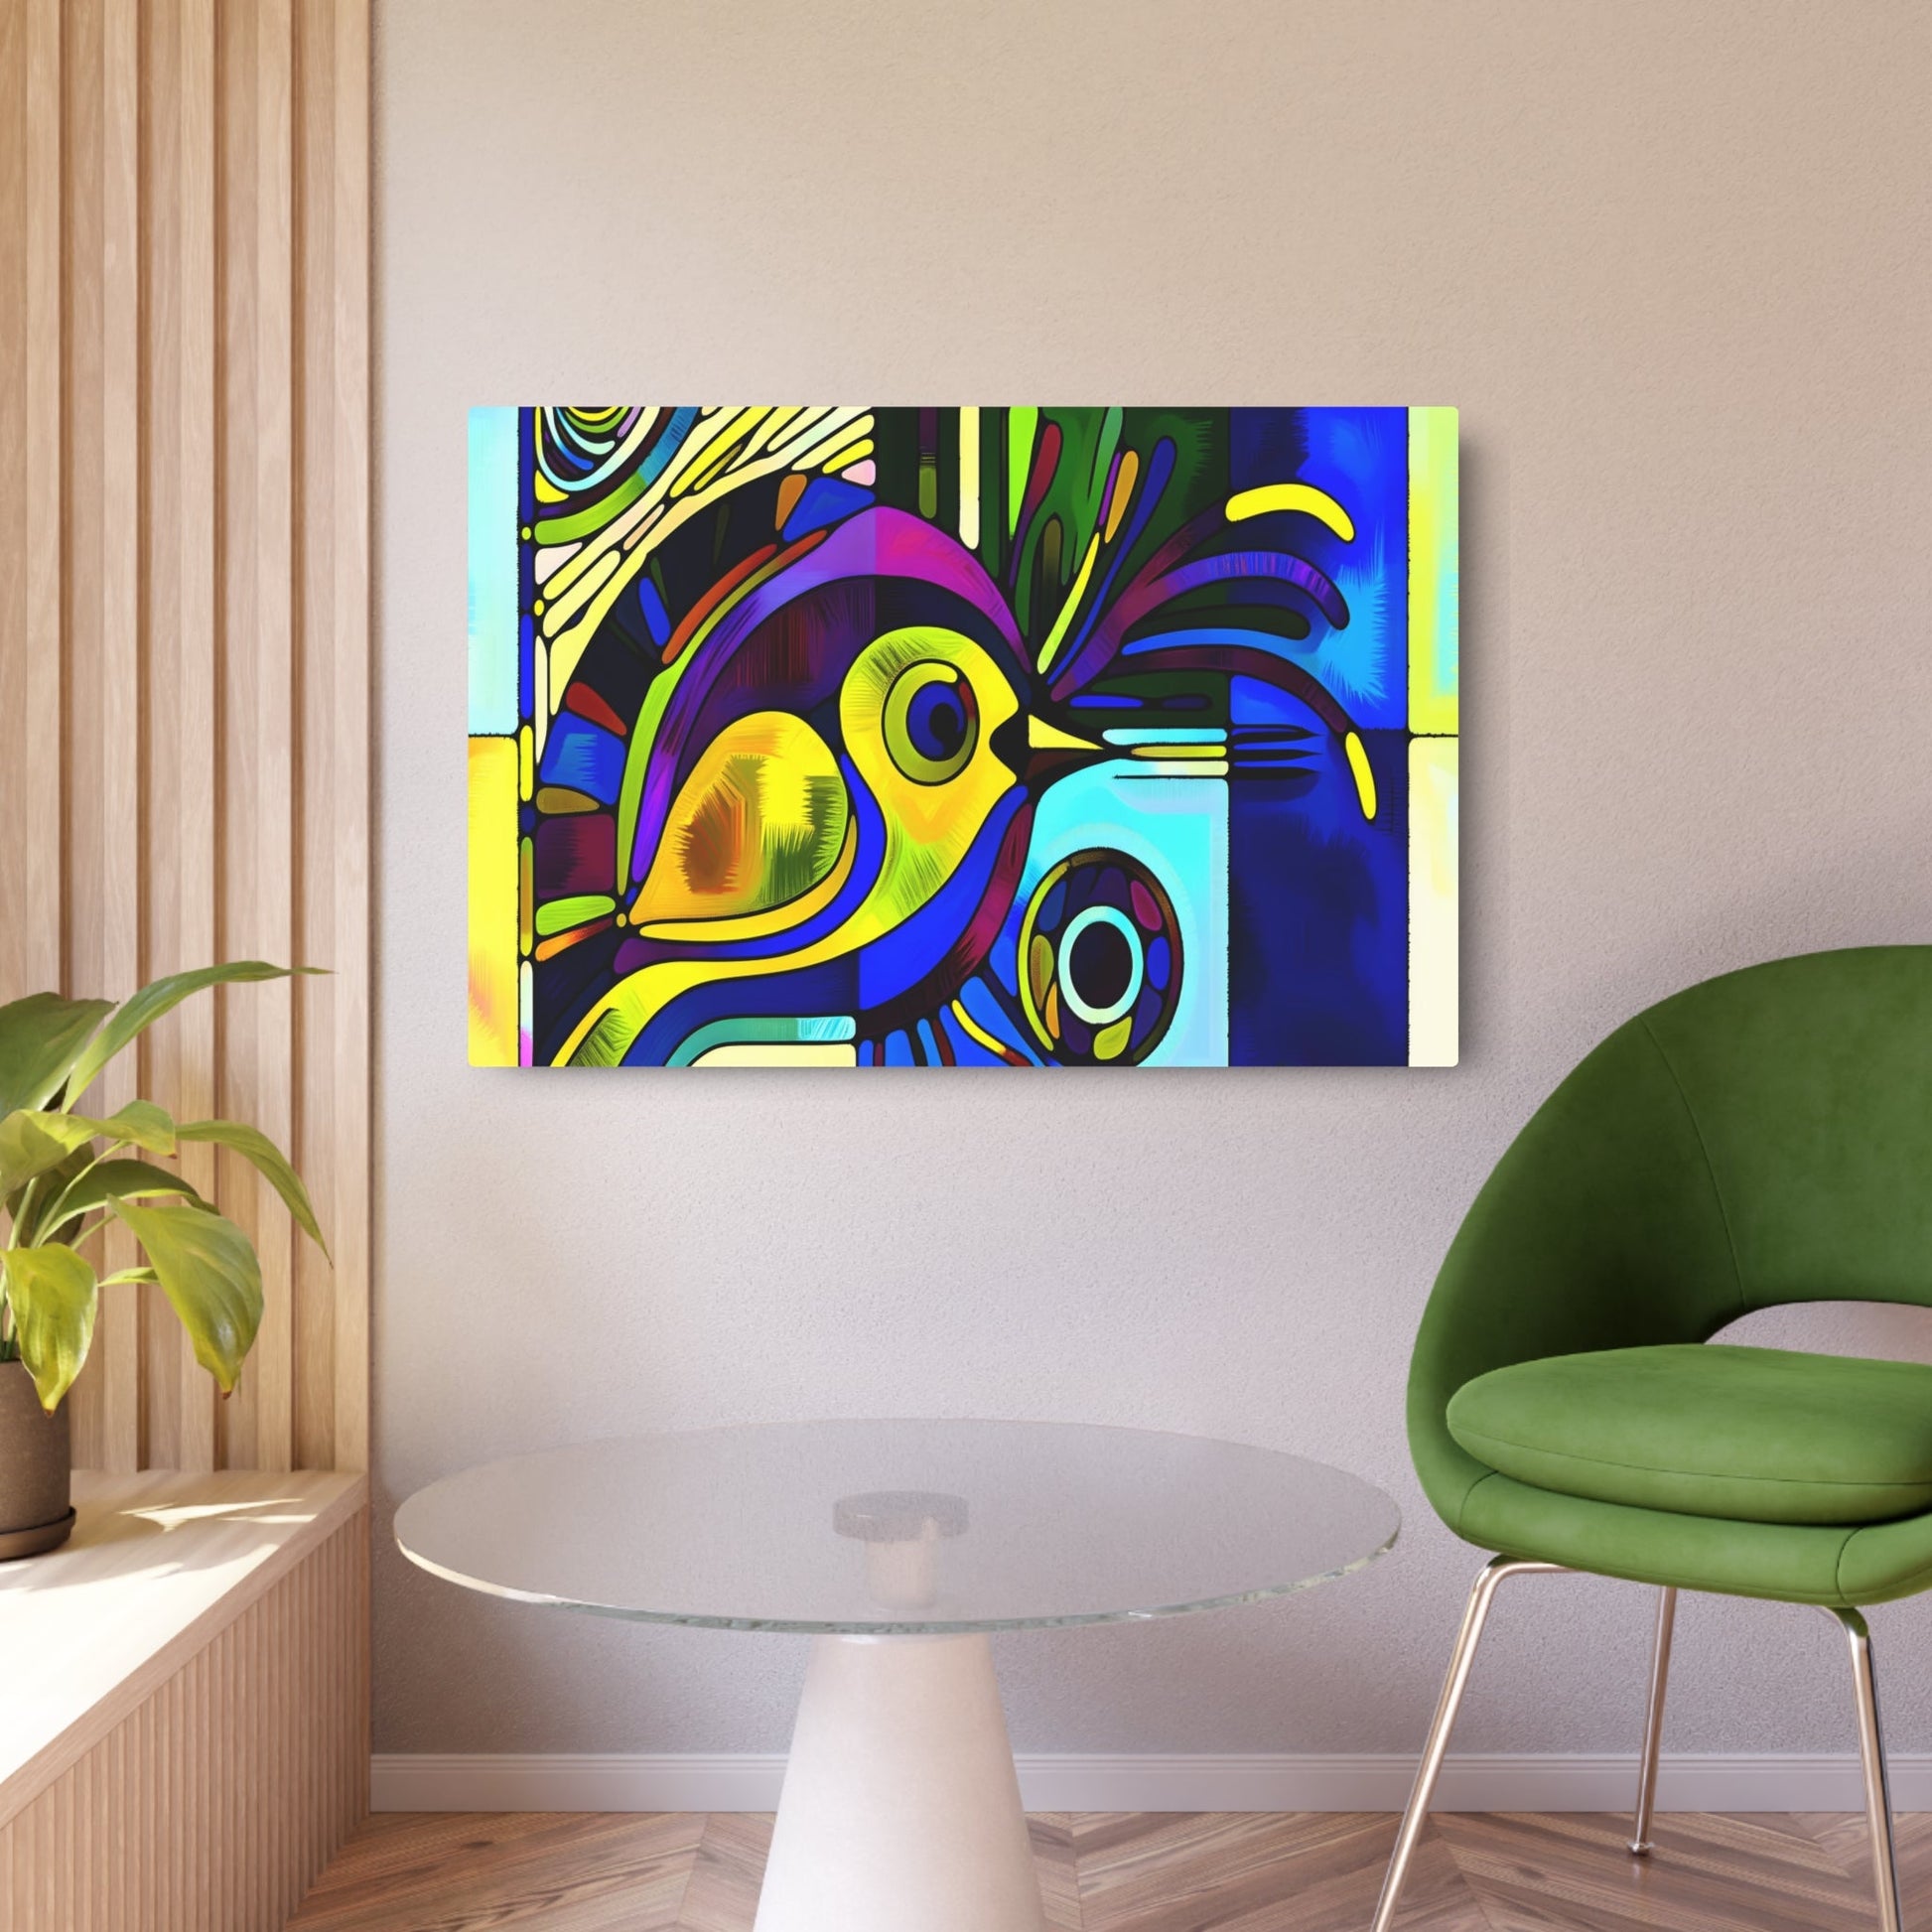 Metal Poster Art | "Modern & Contemporary Pop Art - Vibrant Colored Bird with Bold Outlines - Iconic Style Wall Decor" - Metal Poster Art 36″ x 24″ (Horizontal) 0.12''